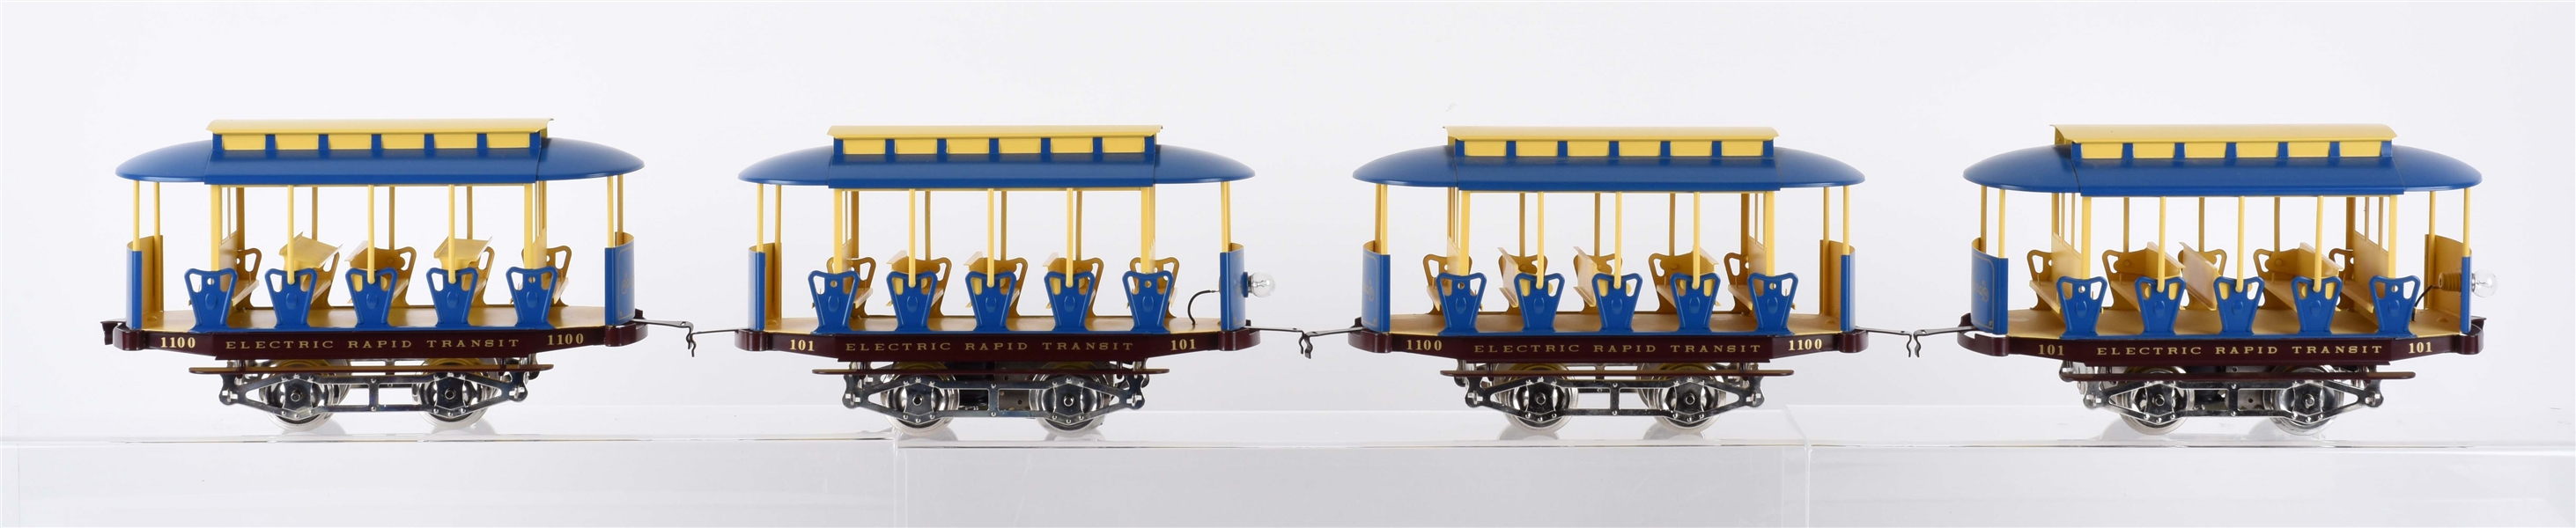 LOT OF 2: LIONEL CELEBRATION SERIES OUTFIT NO. 13113 TROLLEY SET. 